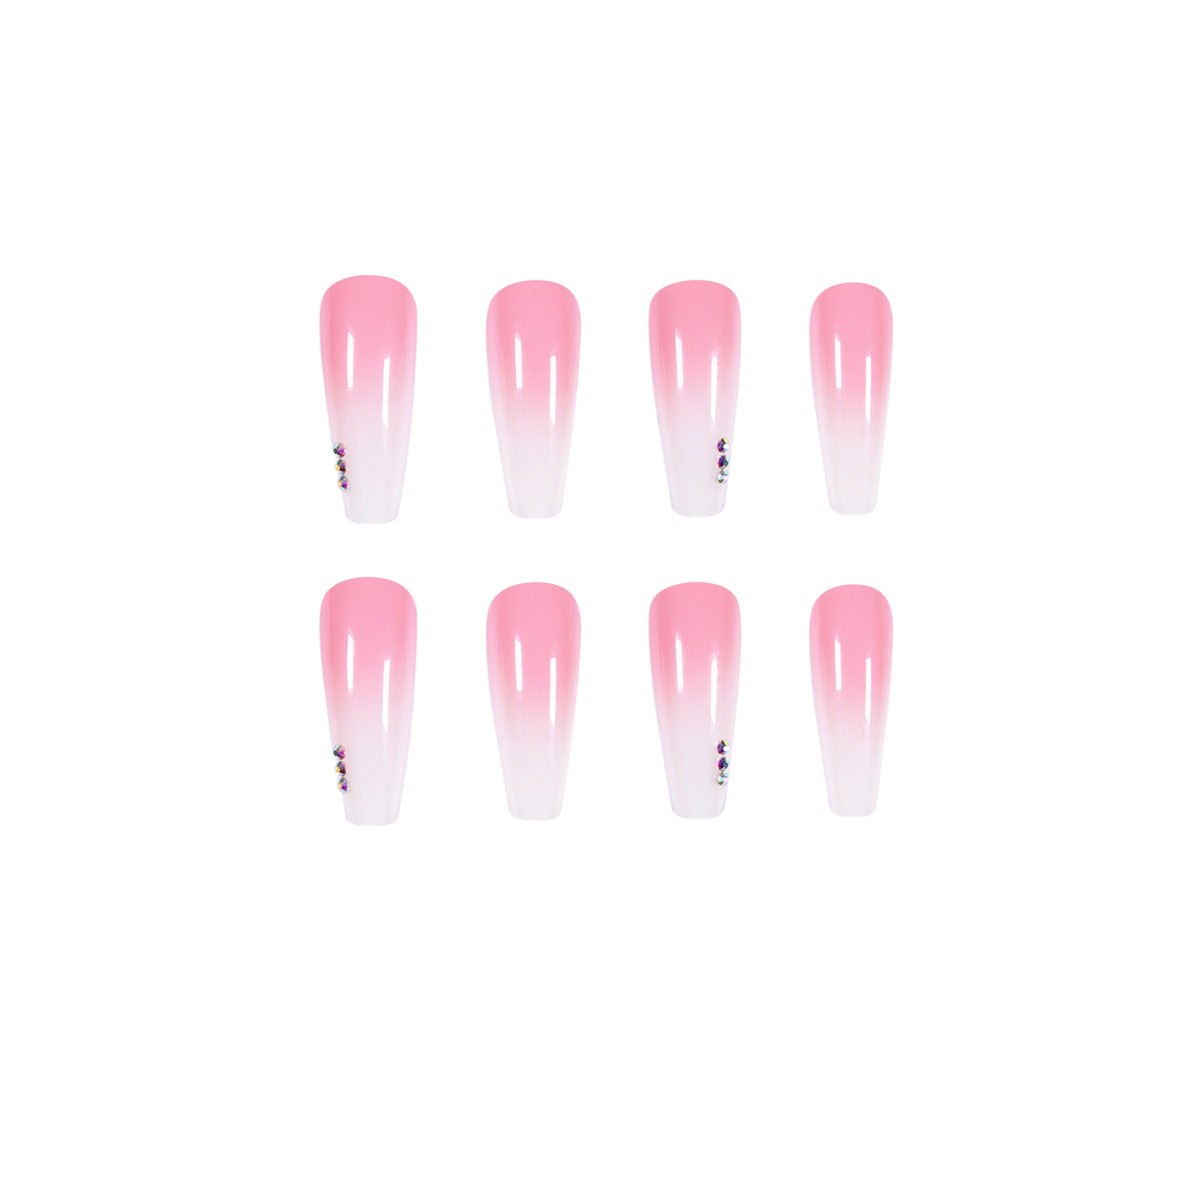 RICEEL®Colorful Stiletto Nails